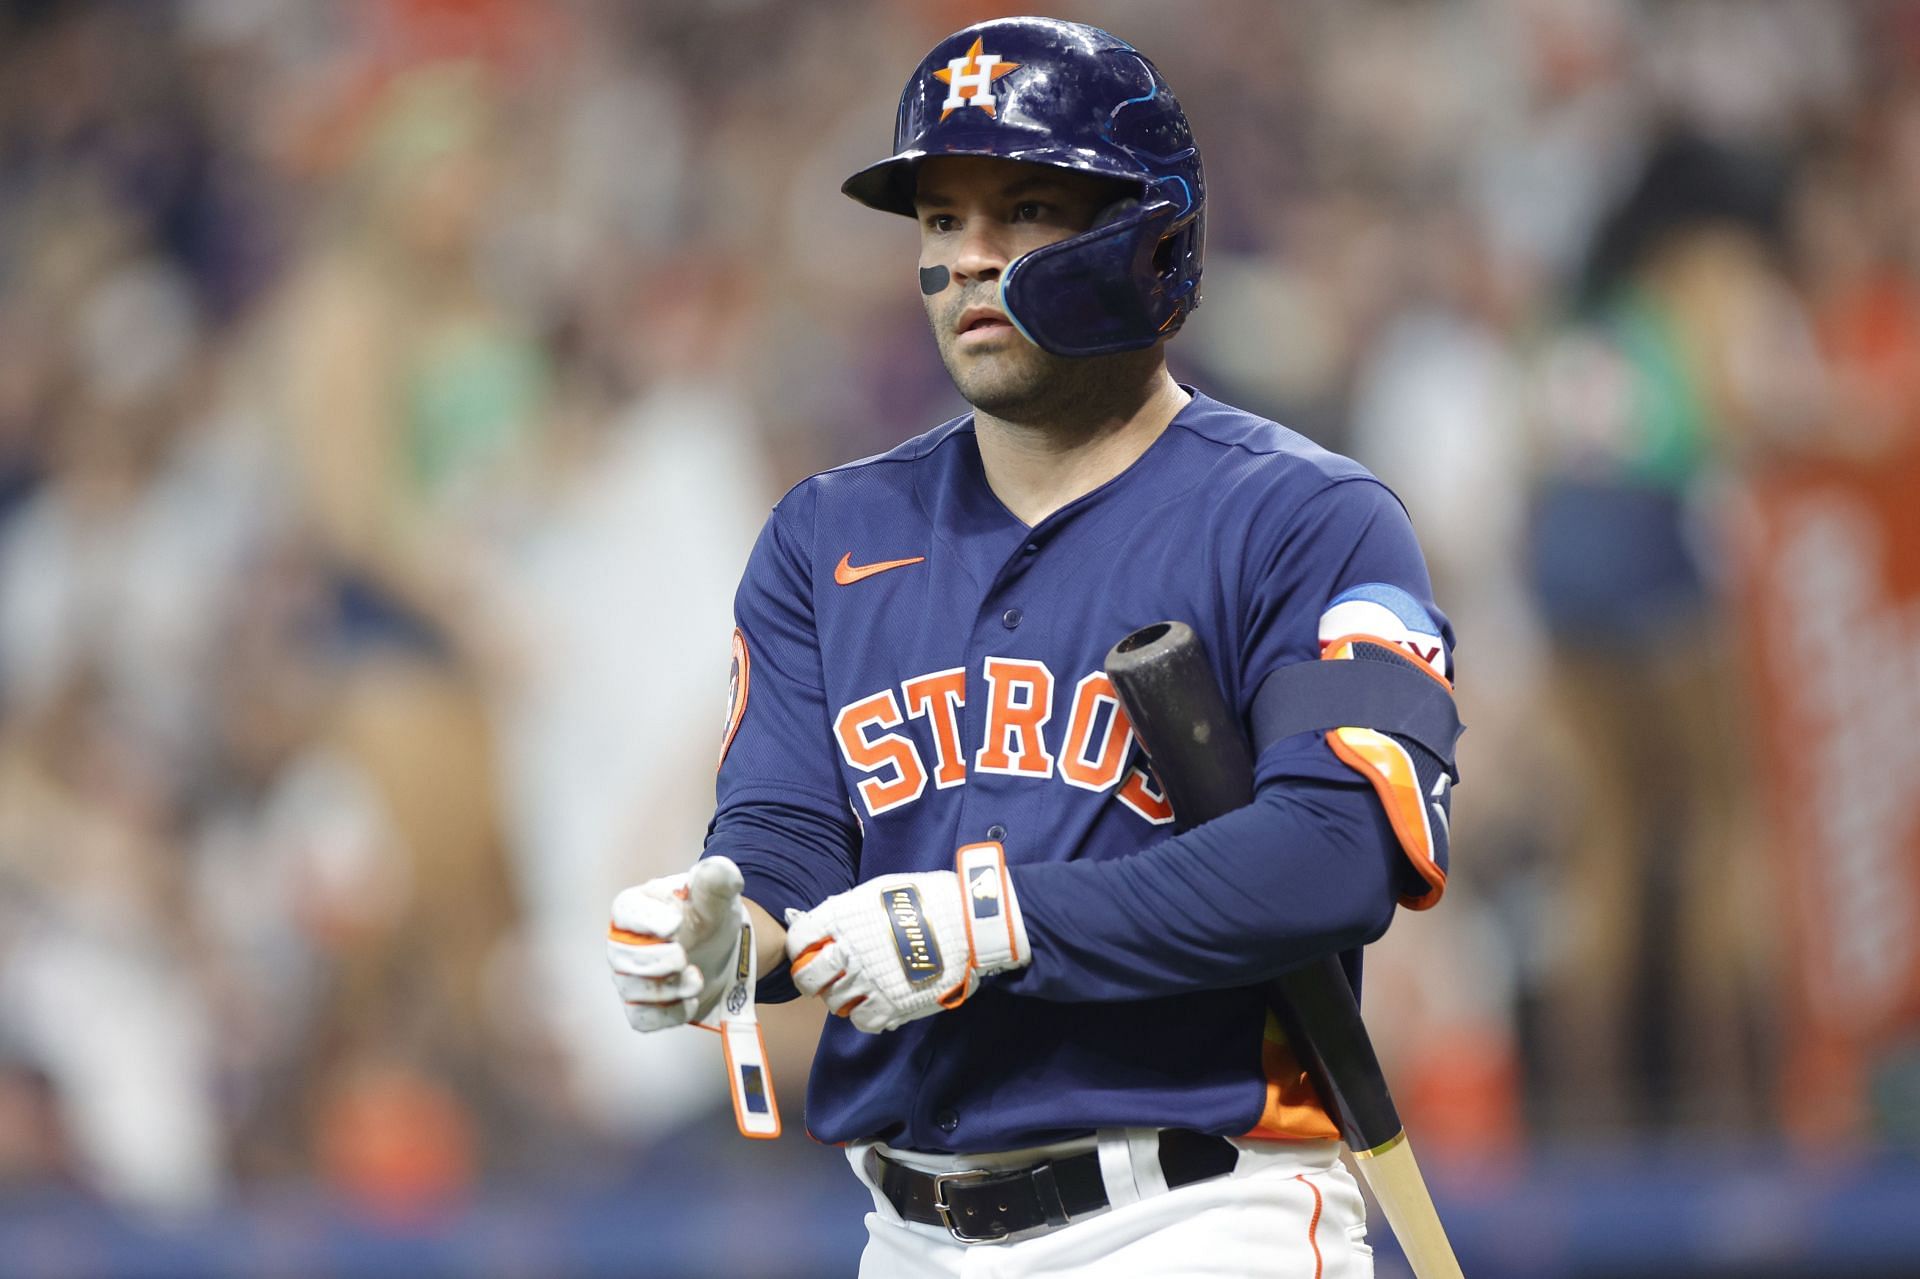 Jose Altuve has played 124 or more games since 2012.